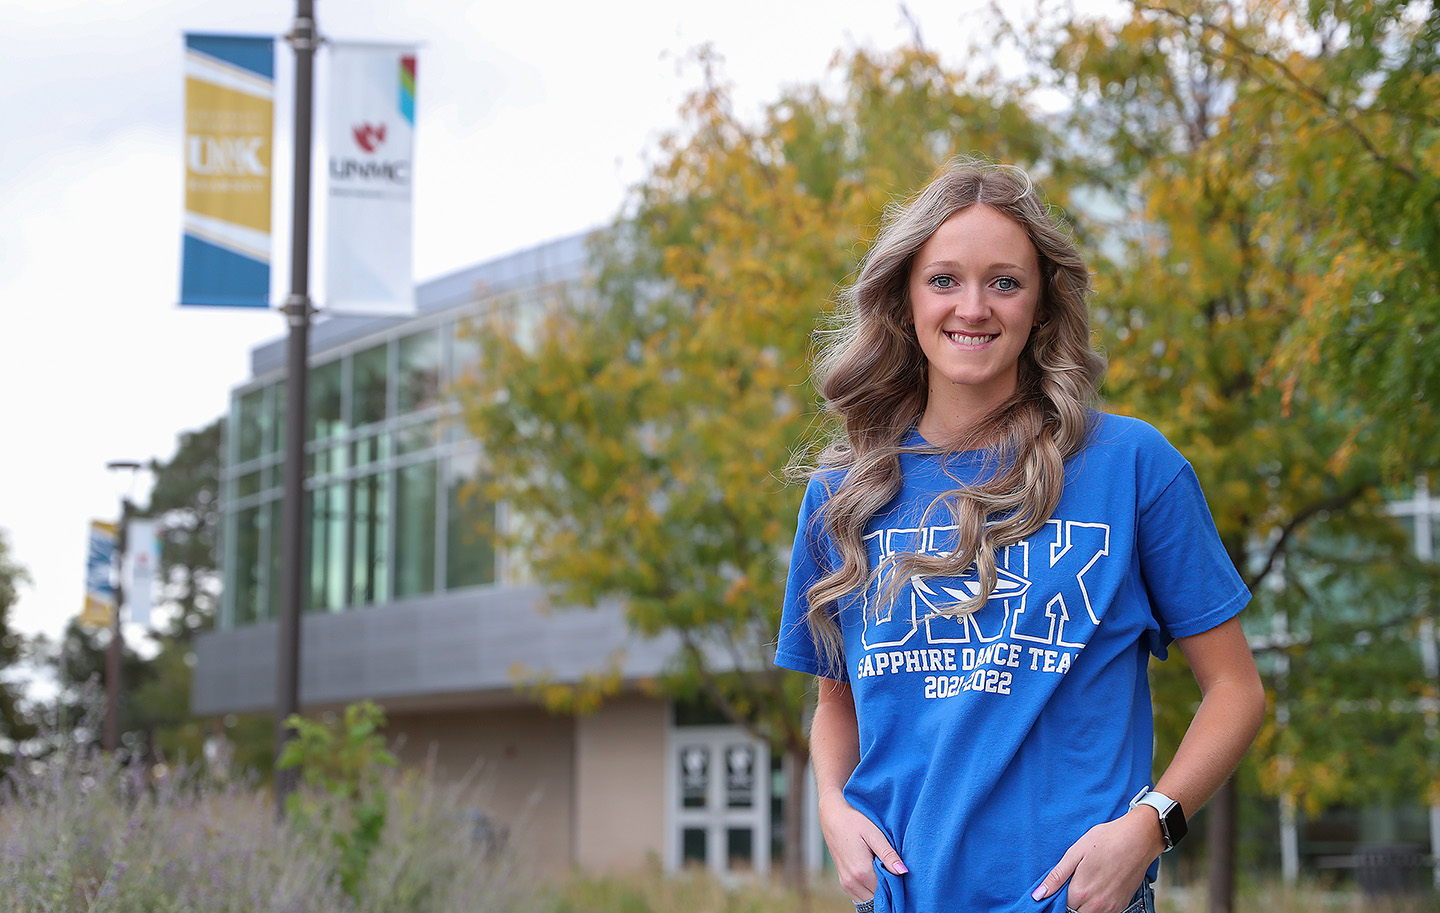 Riley Cope is studying radiography at the Health Science Education Complex on the UNK campus. Although she’s a UNMC student, Cope remains involved with her sorority and the UNK Sapphires Dance Team.